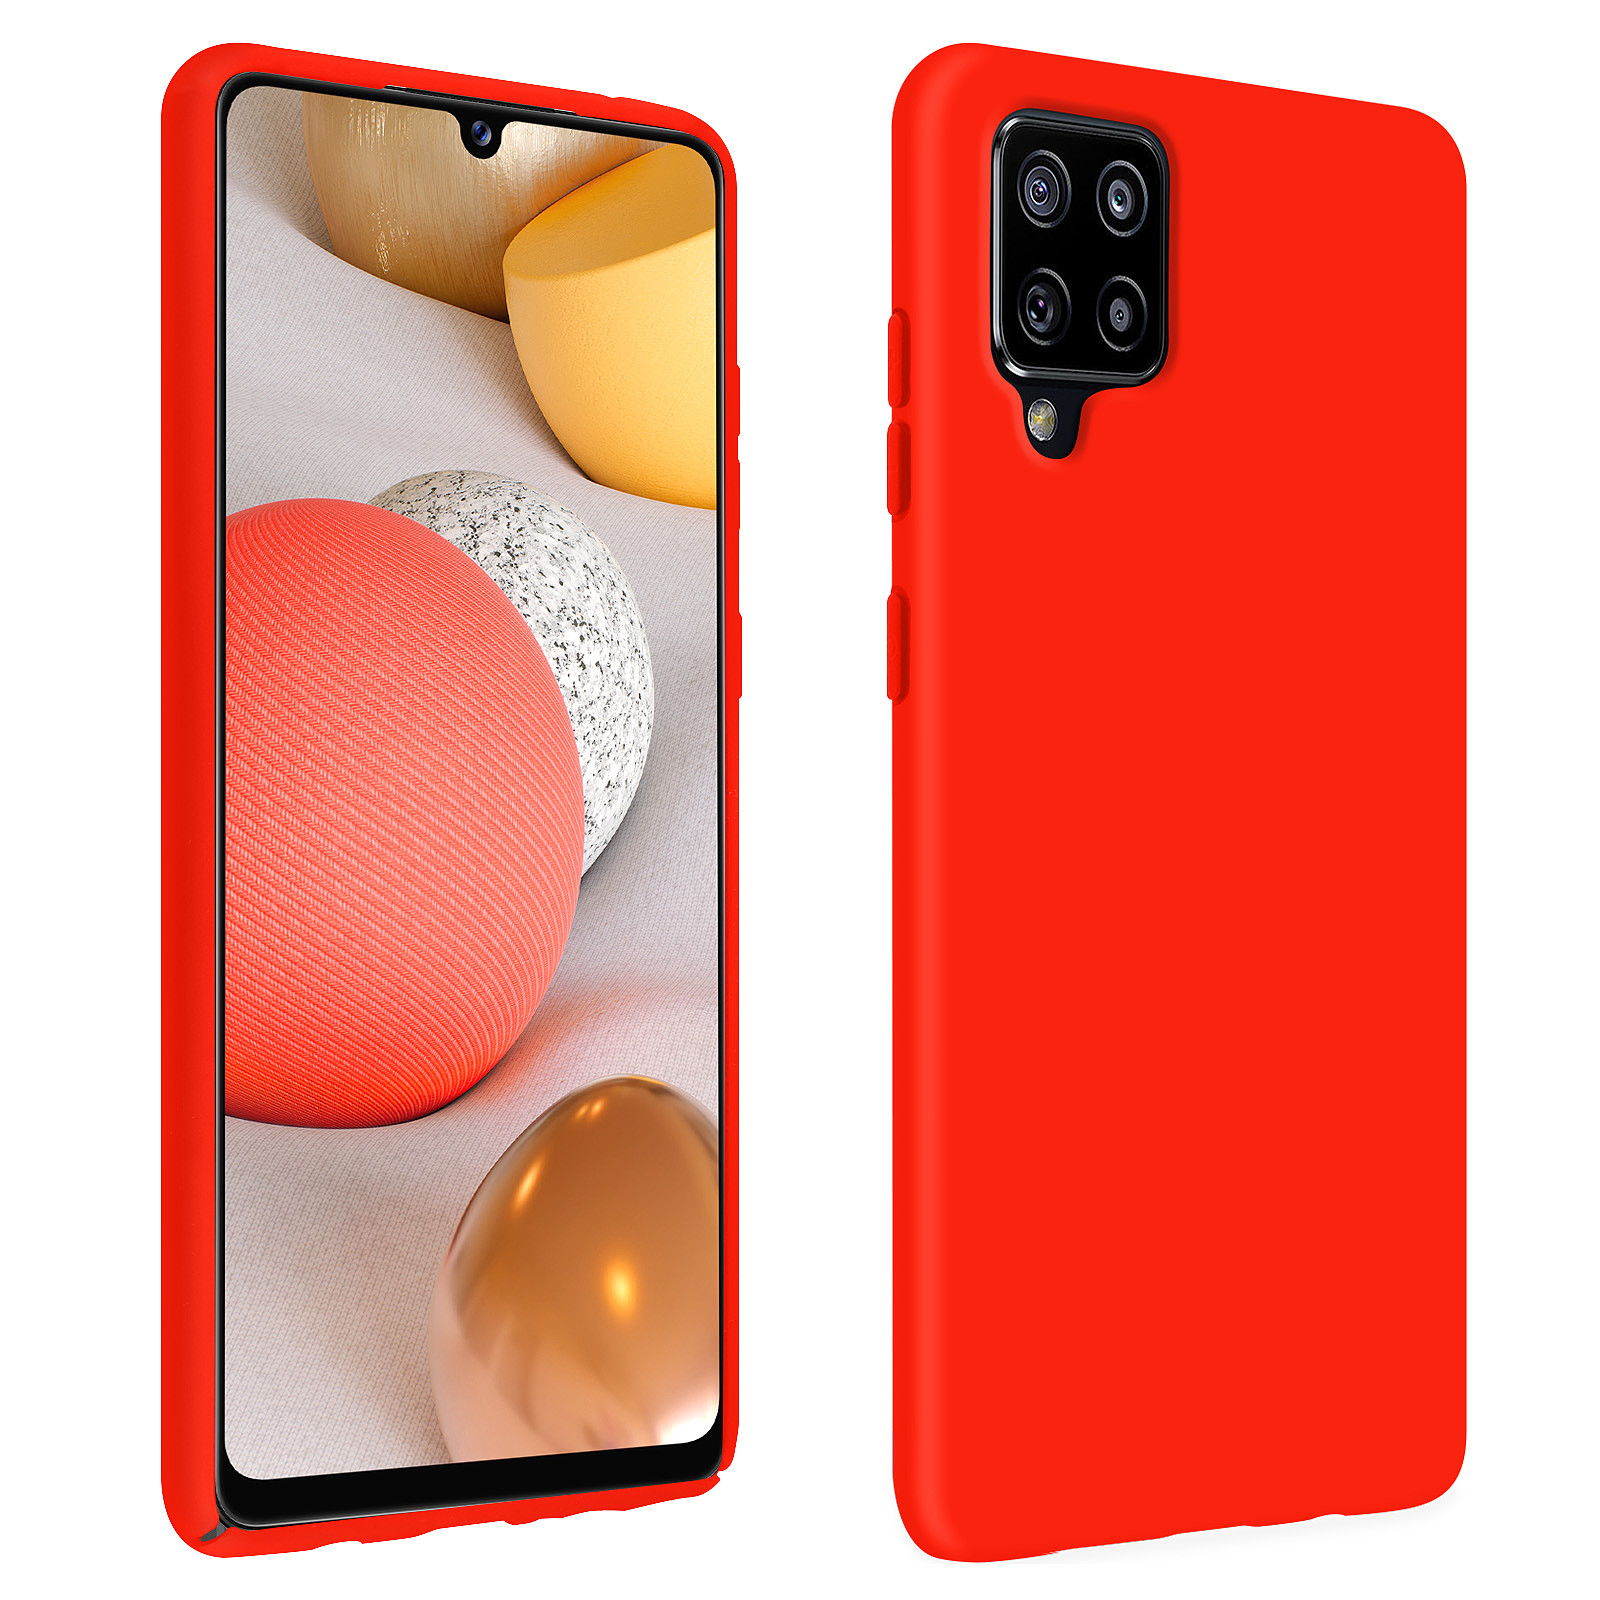 Avizar Coque pour Samsung Galaxy A42 5G Silicone Gel Souple Finition Soft Touch Rouge - Coque telephone Avizar